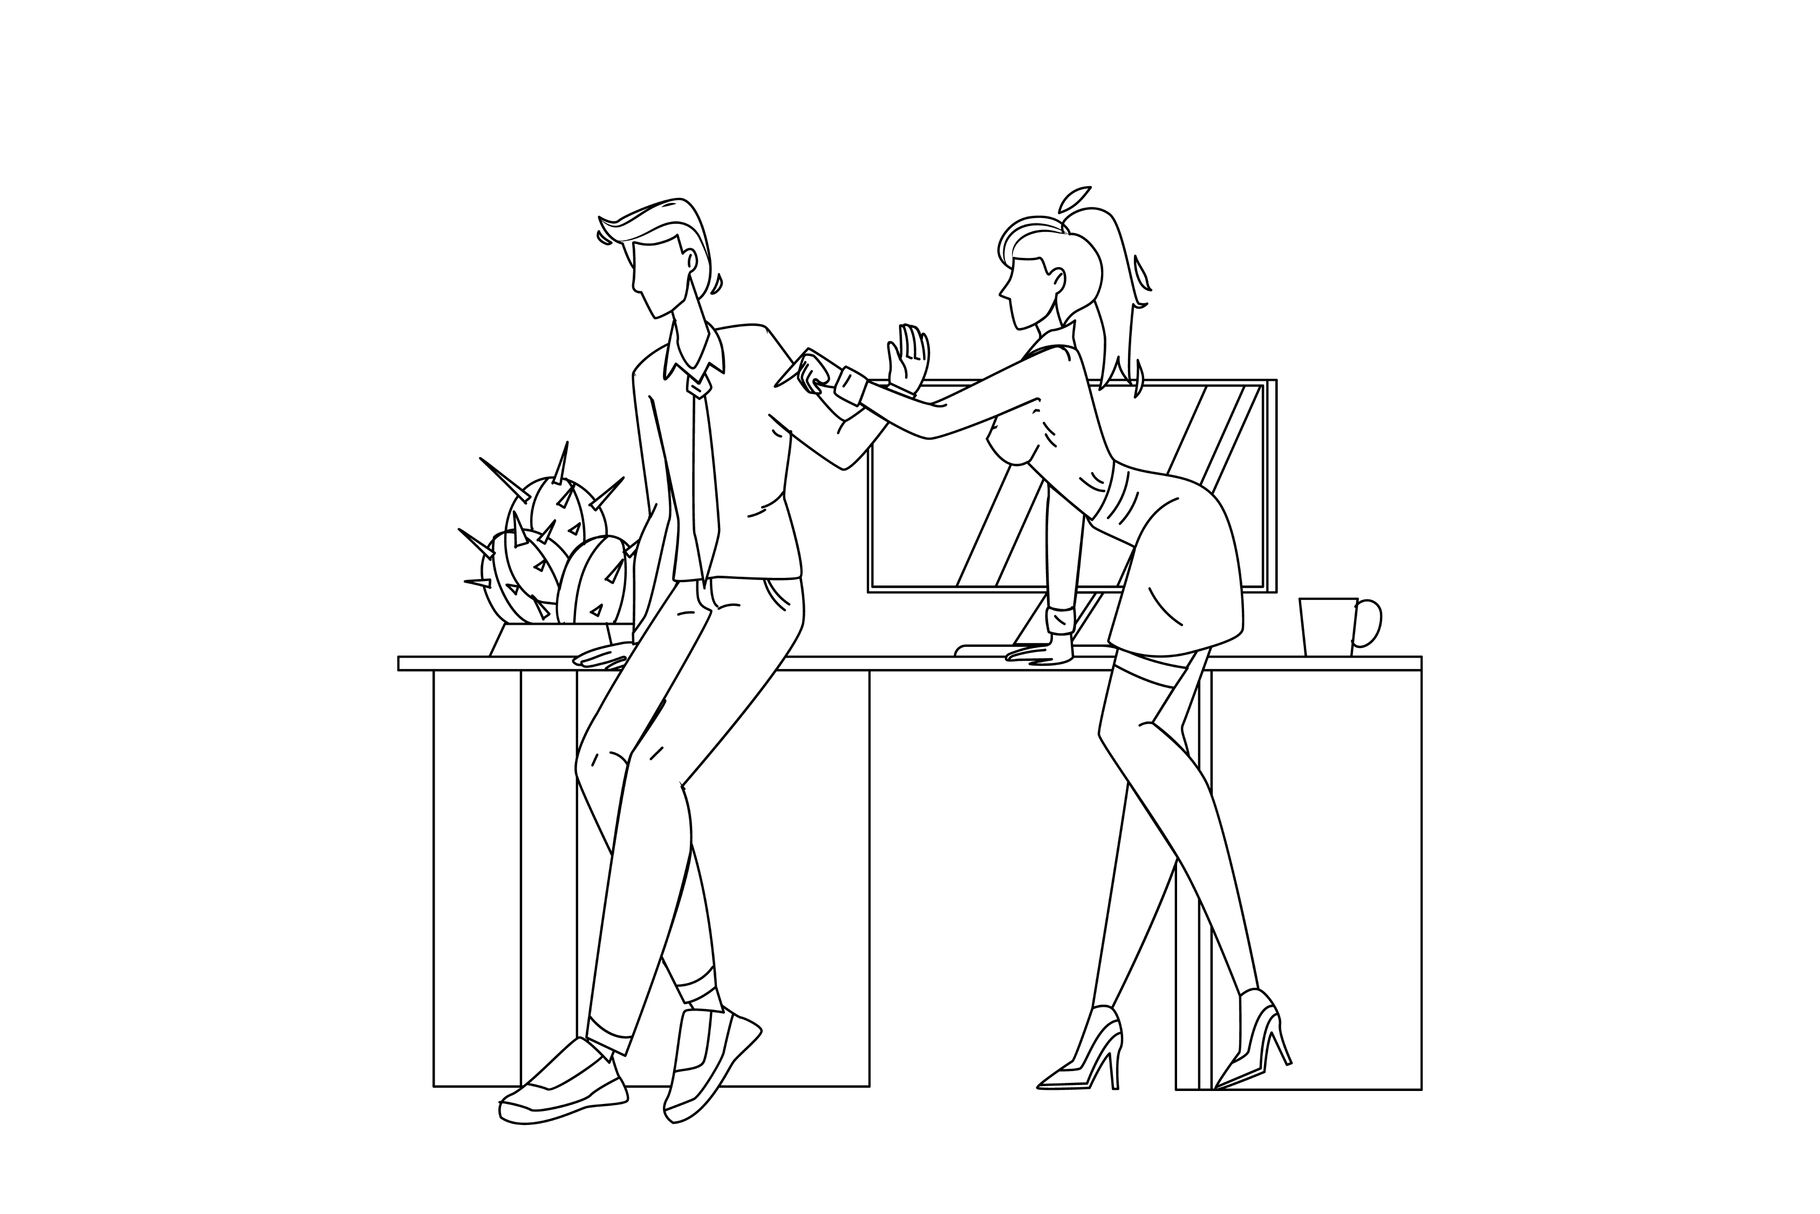 Woman Employee Harassment Man Colleague Vector Illustration By Sevector Thehungryjpeg 